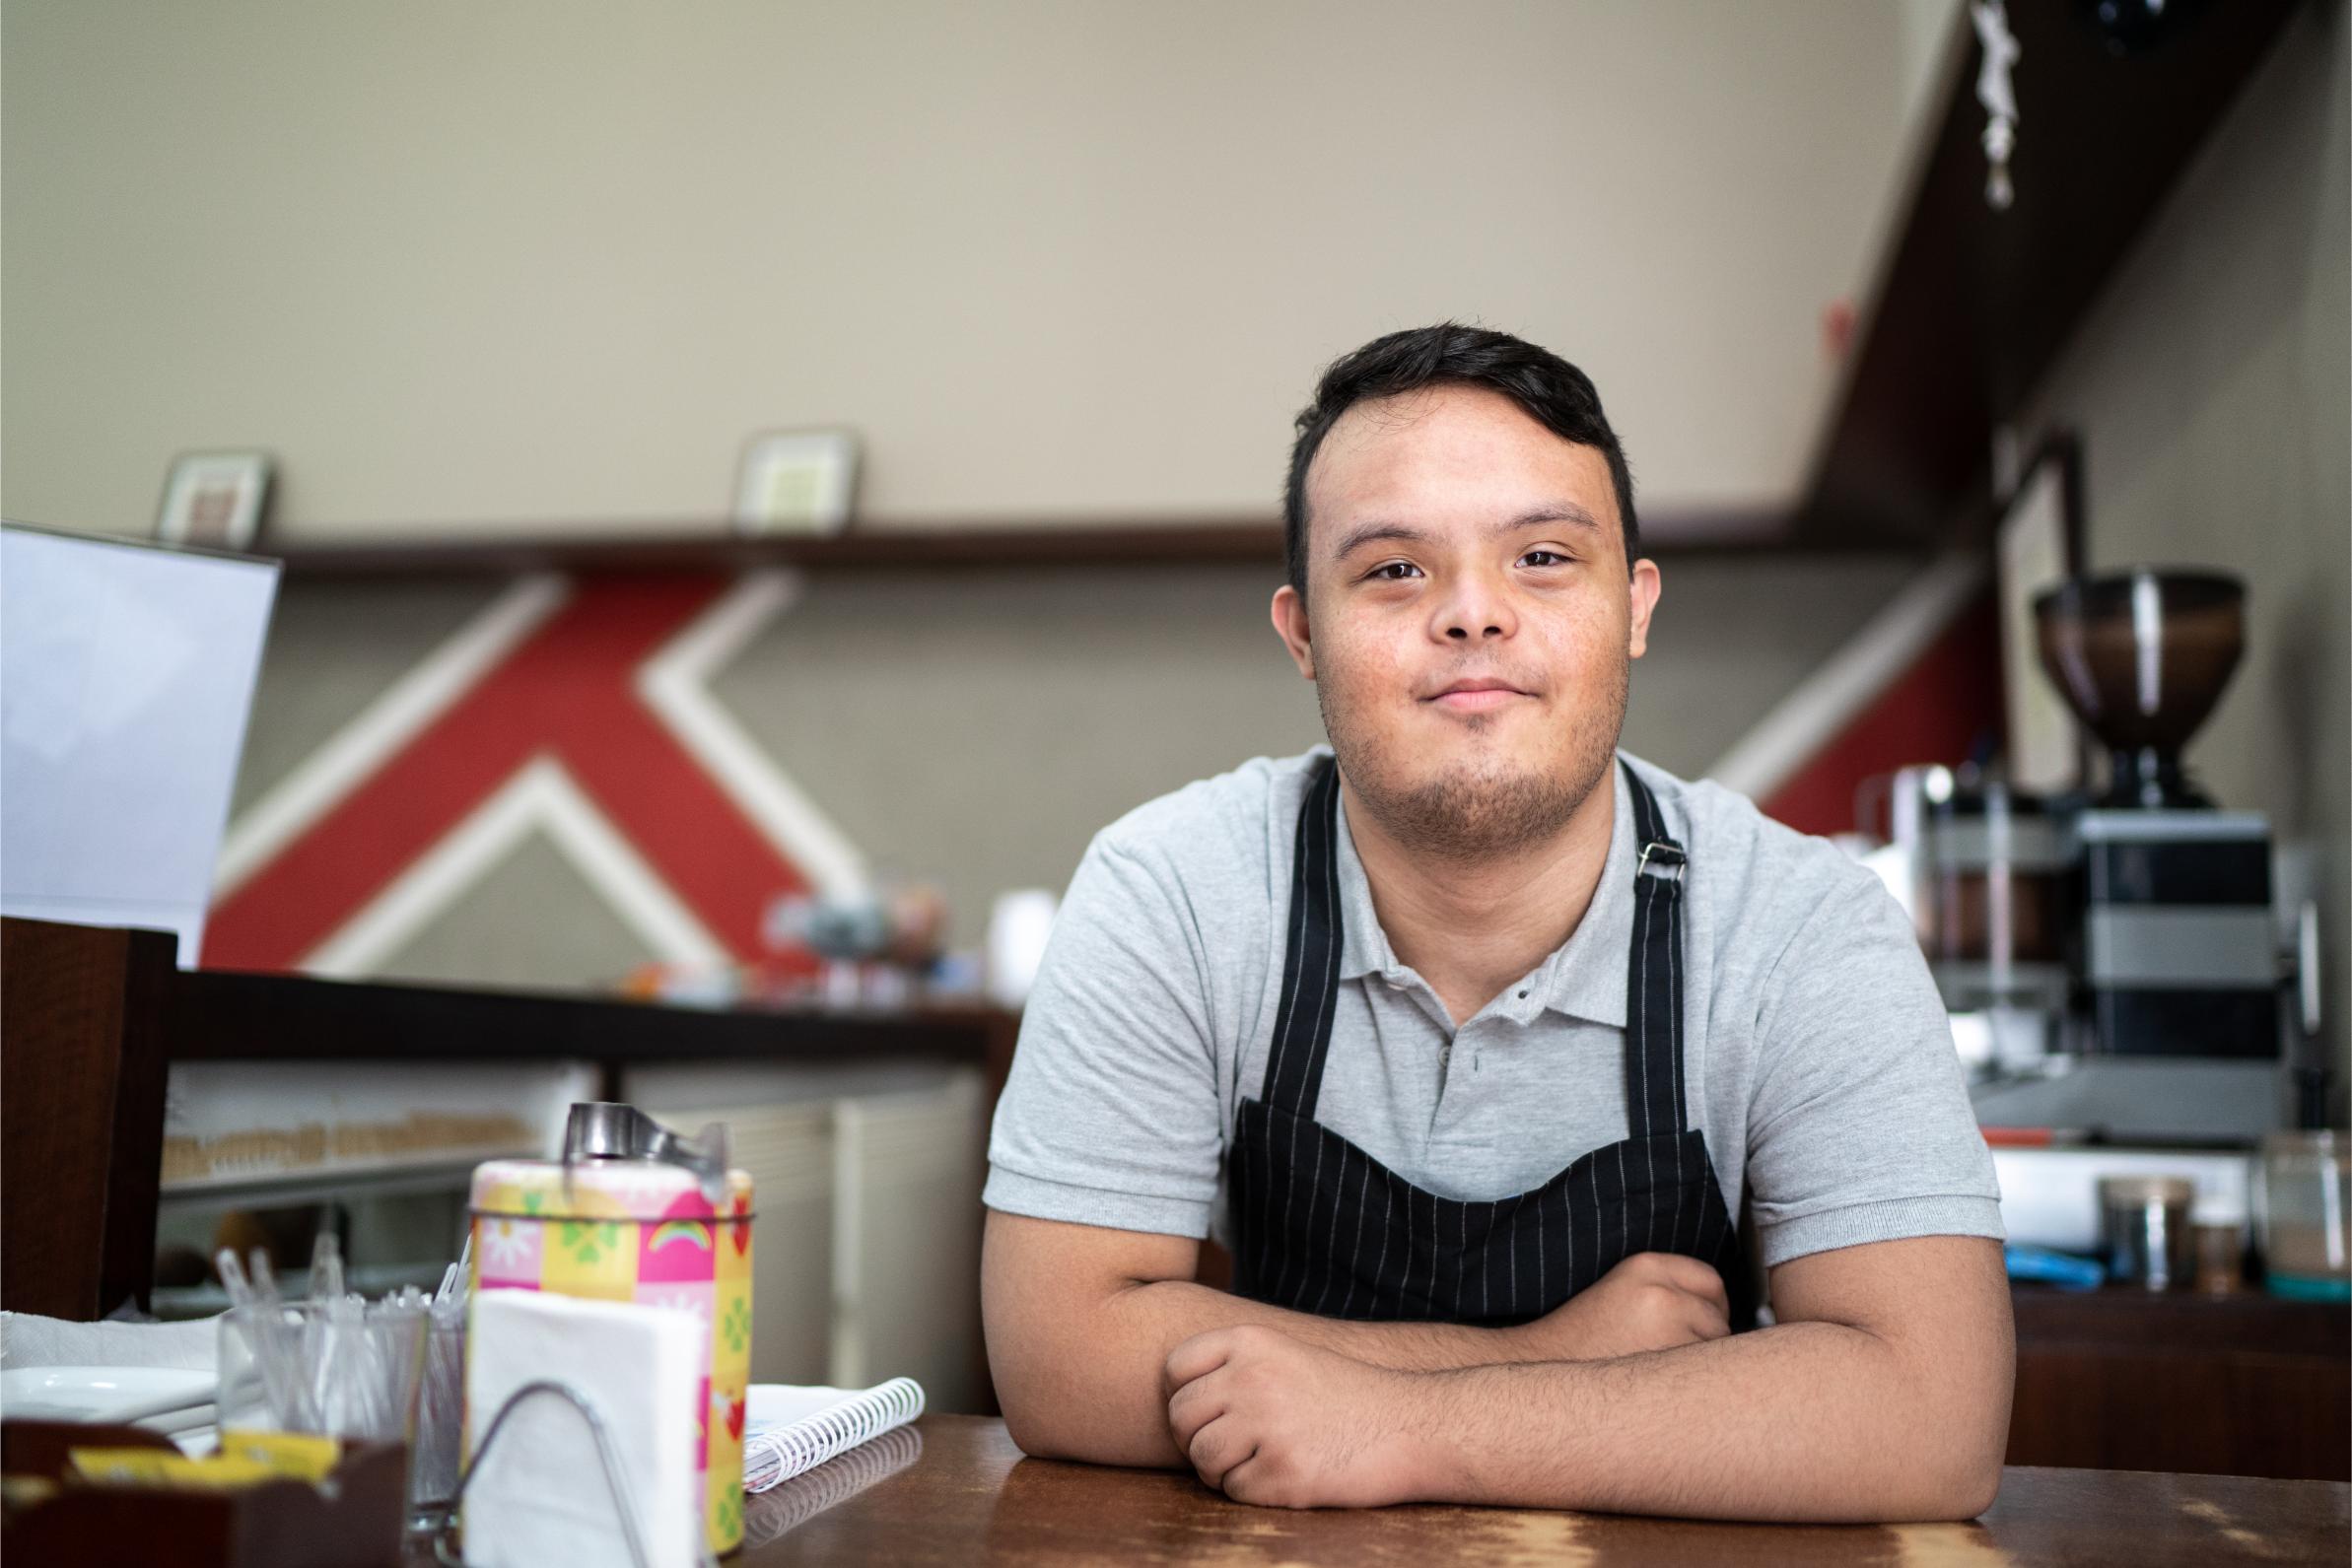 man with developmental disability posing for photo at job in cafe